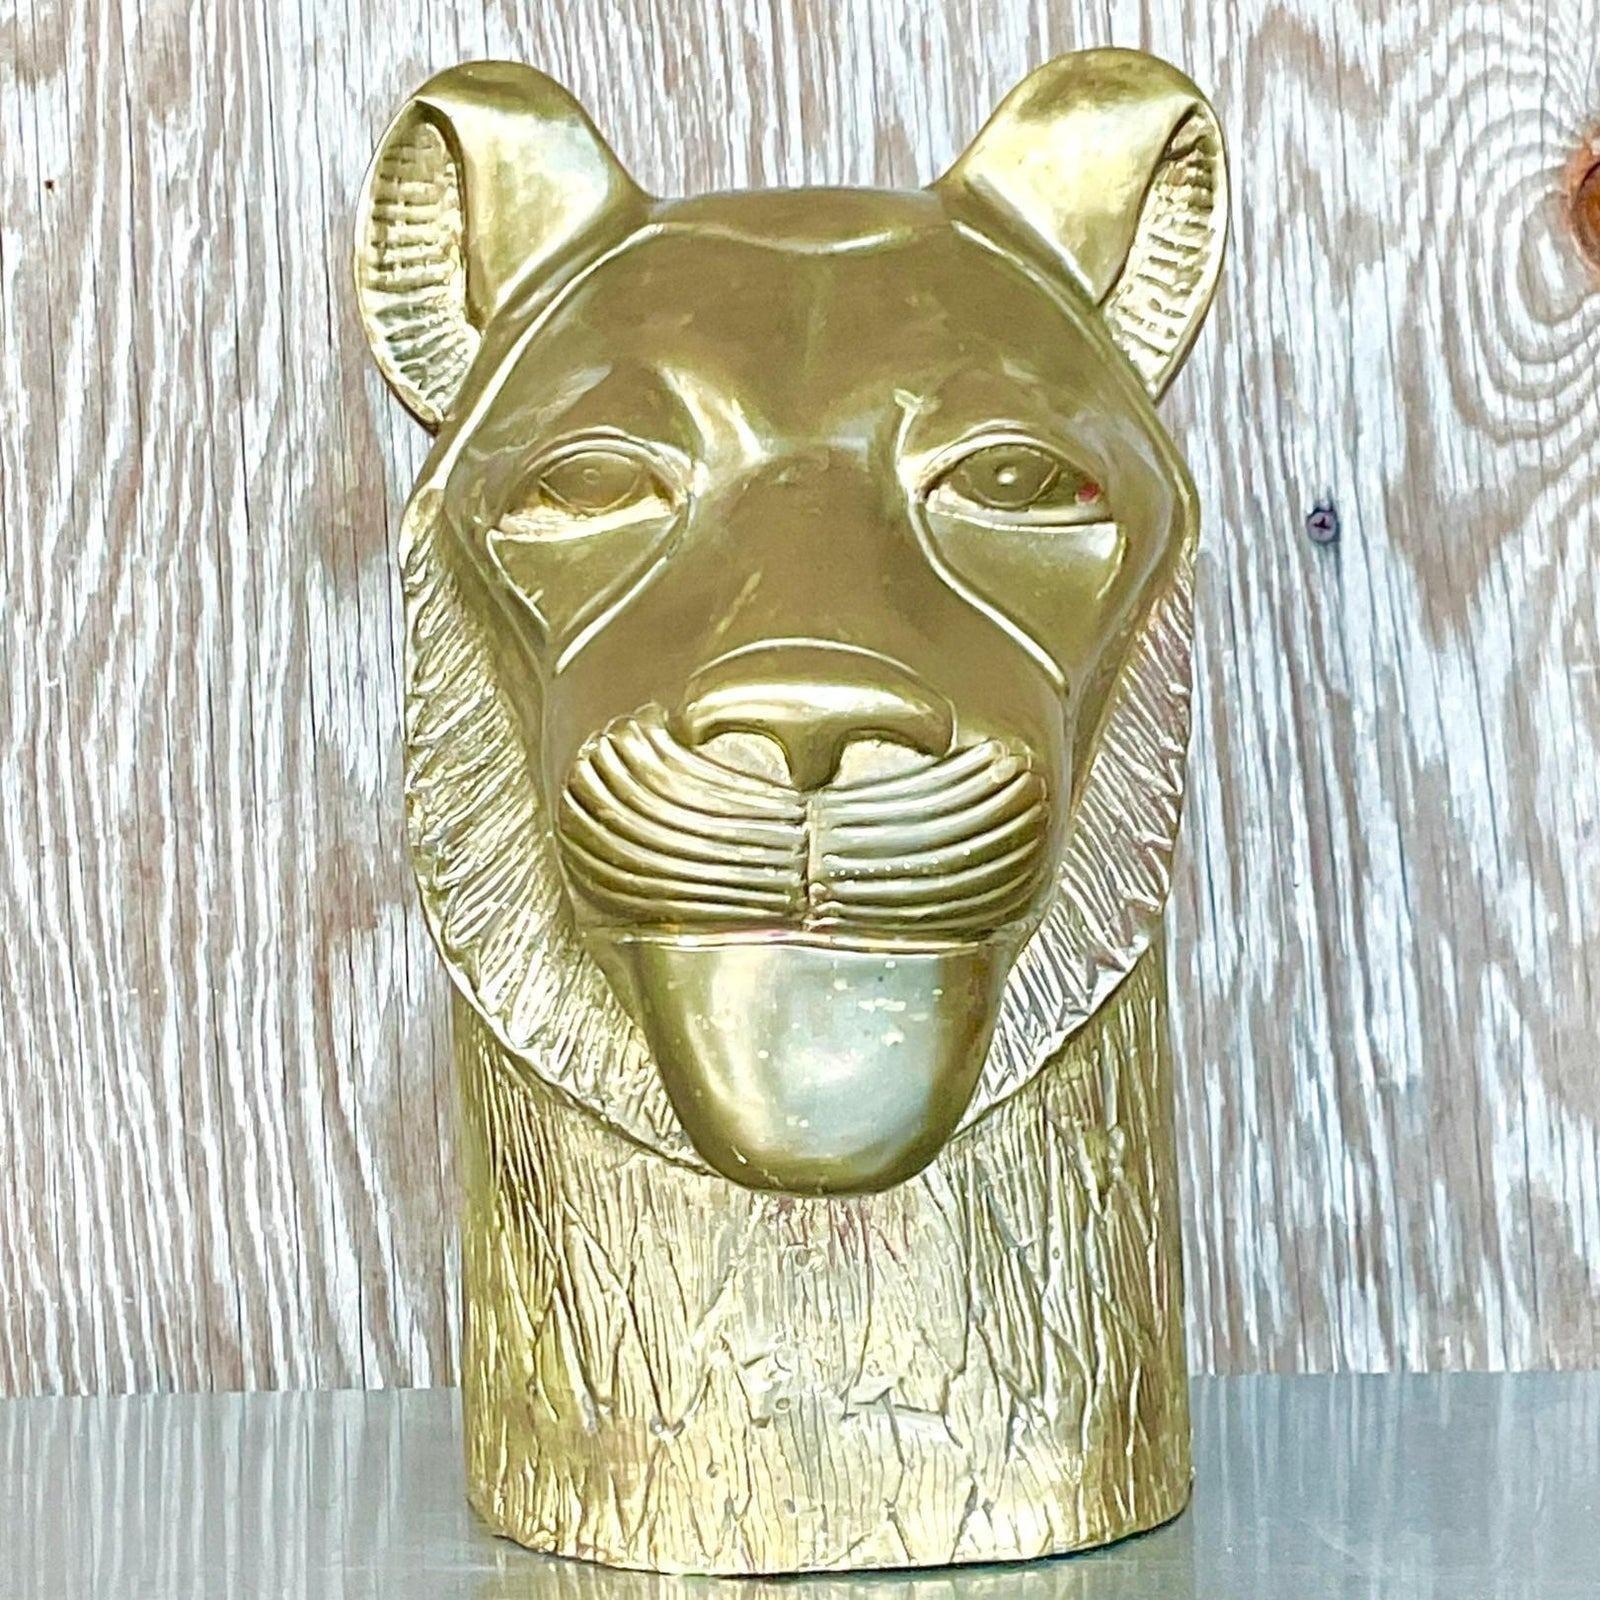 A fantastic vintage Boho Lioness sculpture. Made by the iconic Chapman group. A heavy composition in solid brass. Acquired from a Palm Beach estate.